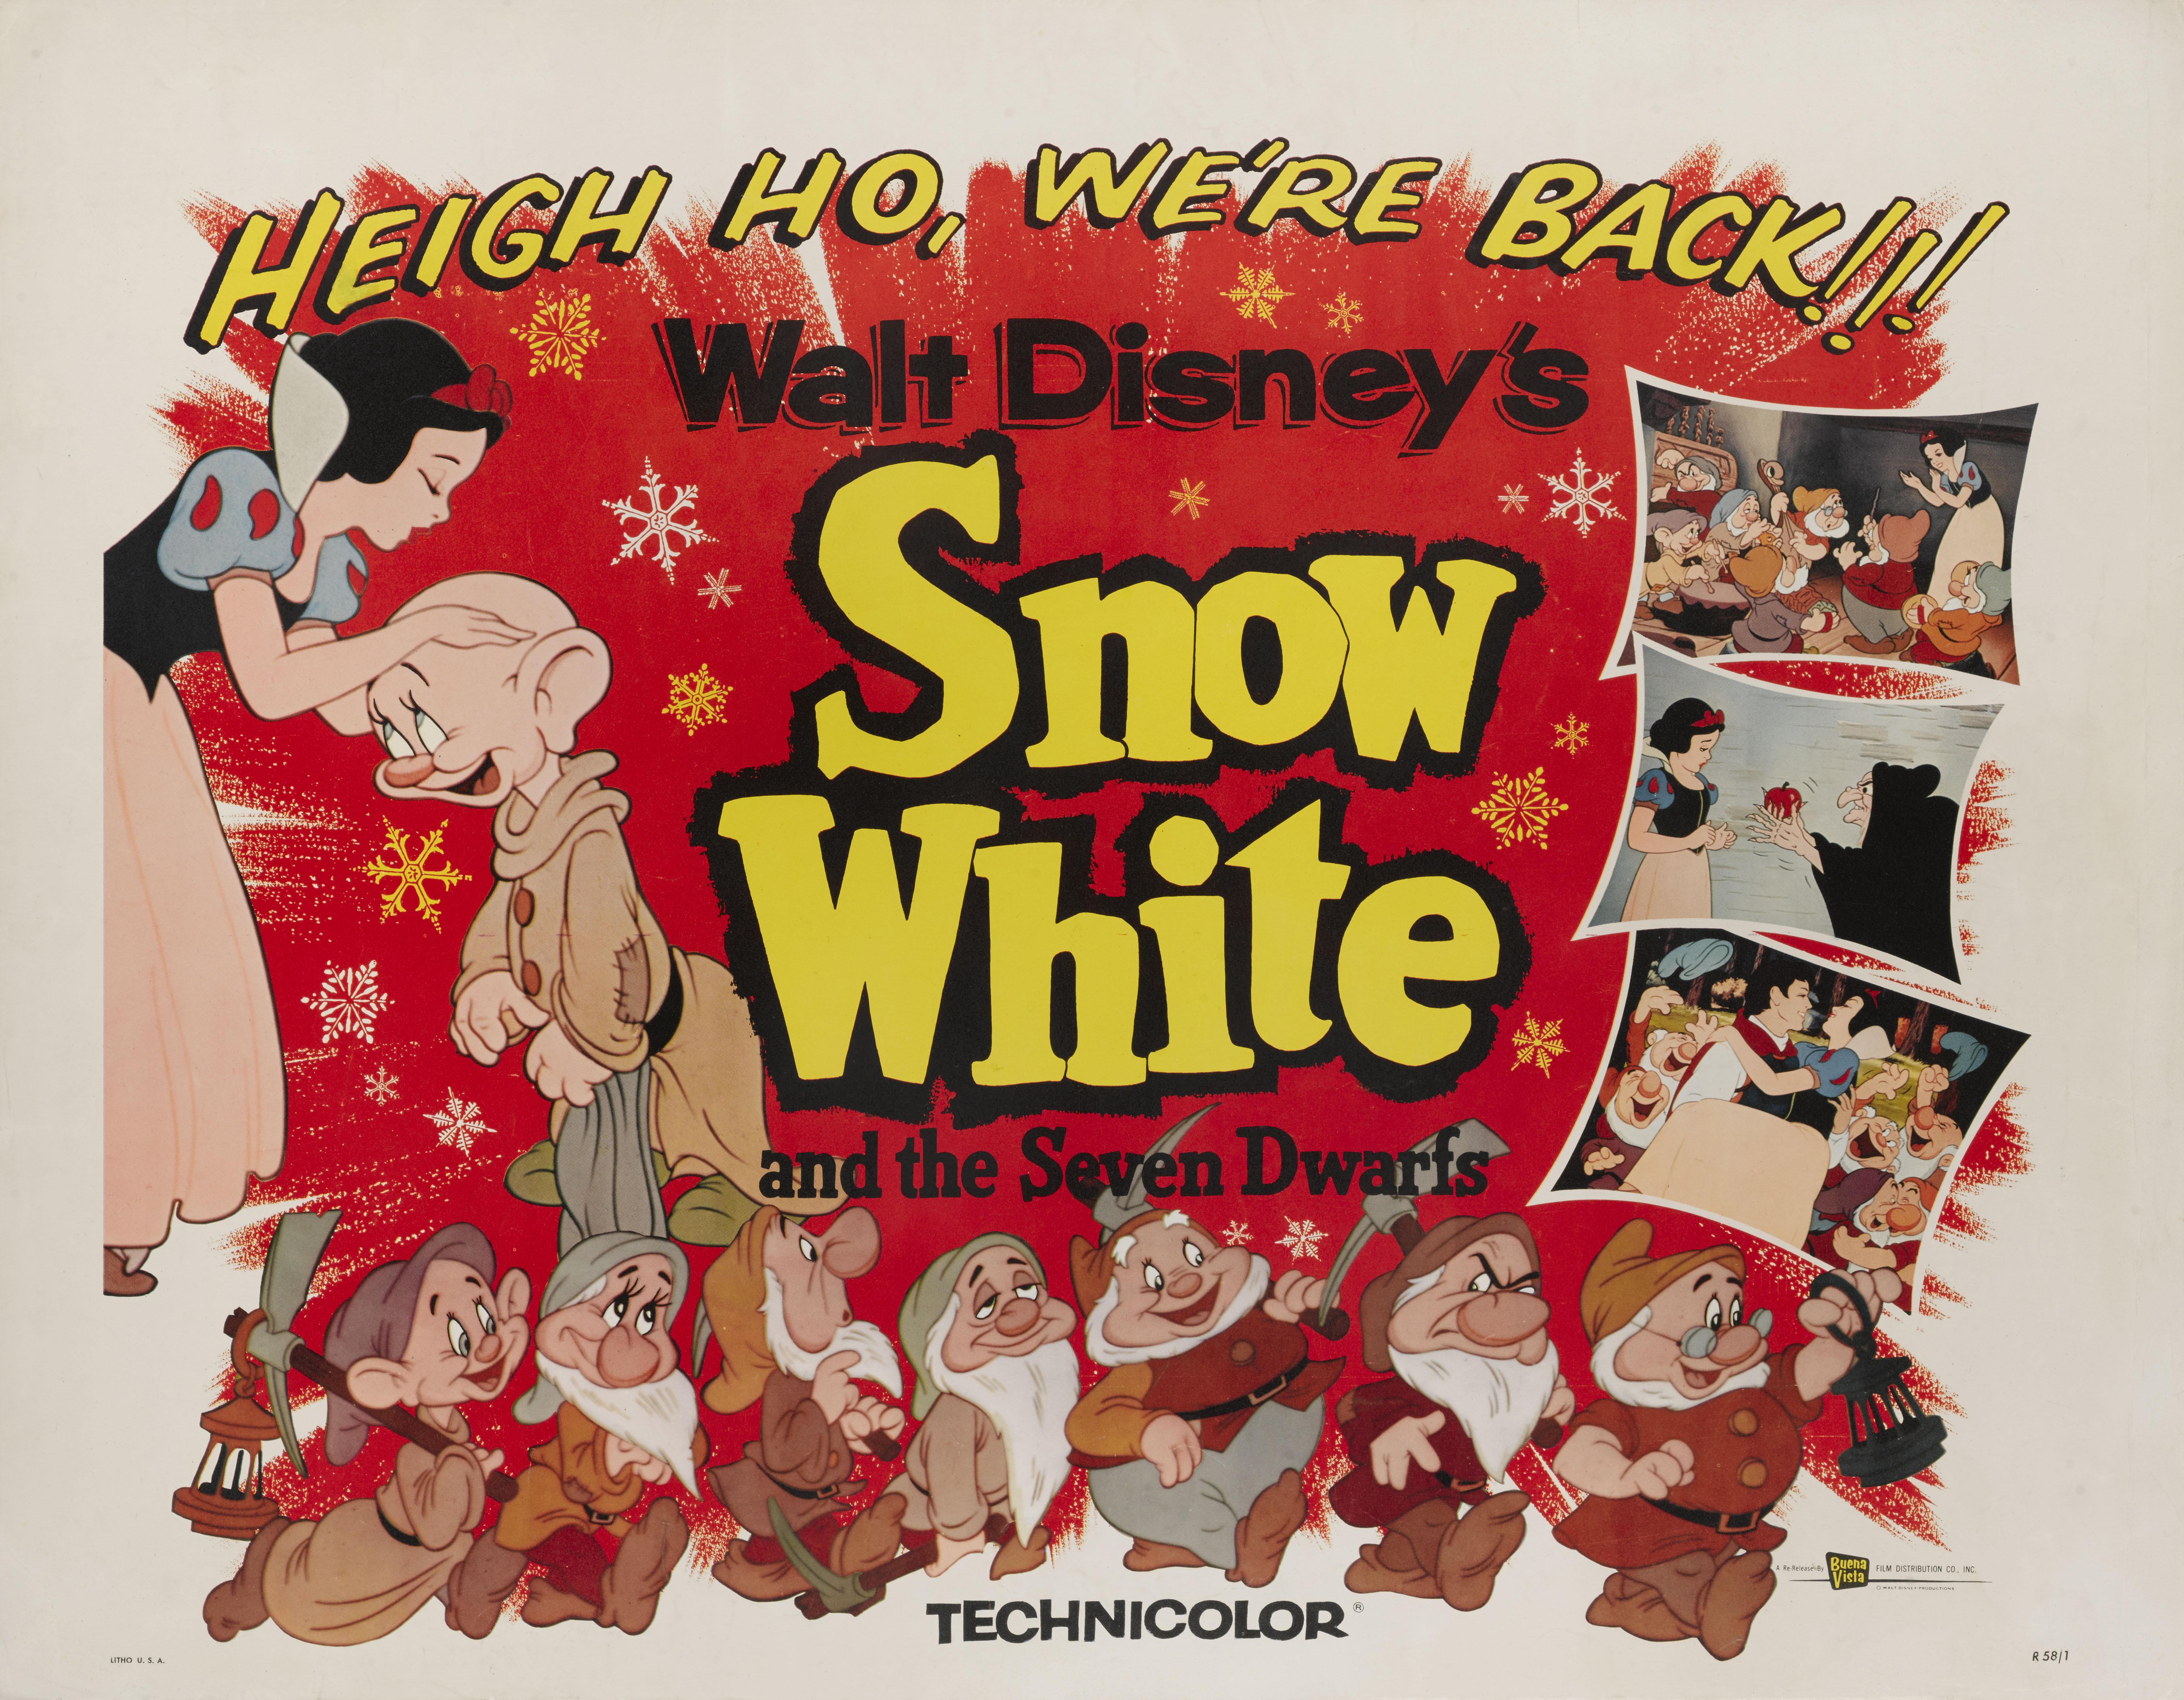 Original US film poster for Snow White and the Seven Dwarfs 1937.
This poster was created for the films re-release in 1958.
This was Walt Disney's first feature animation and when it was released in 1937 was welcomed as a magical marvel. Disney